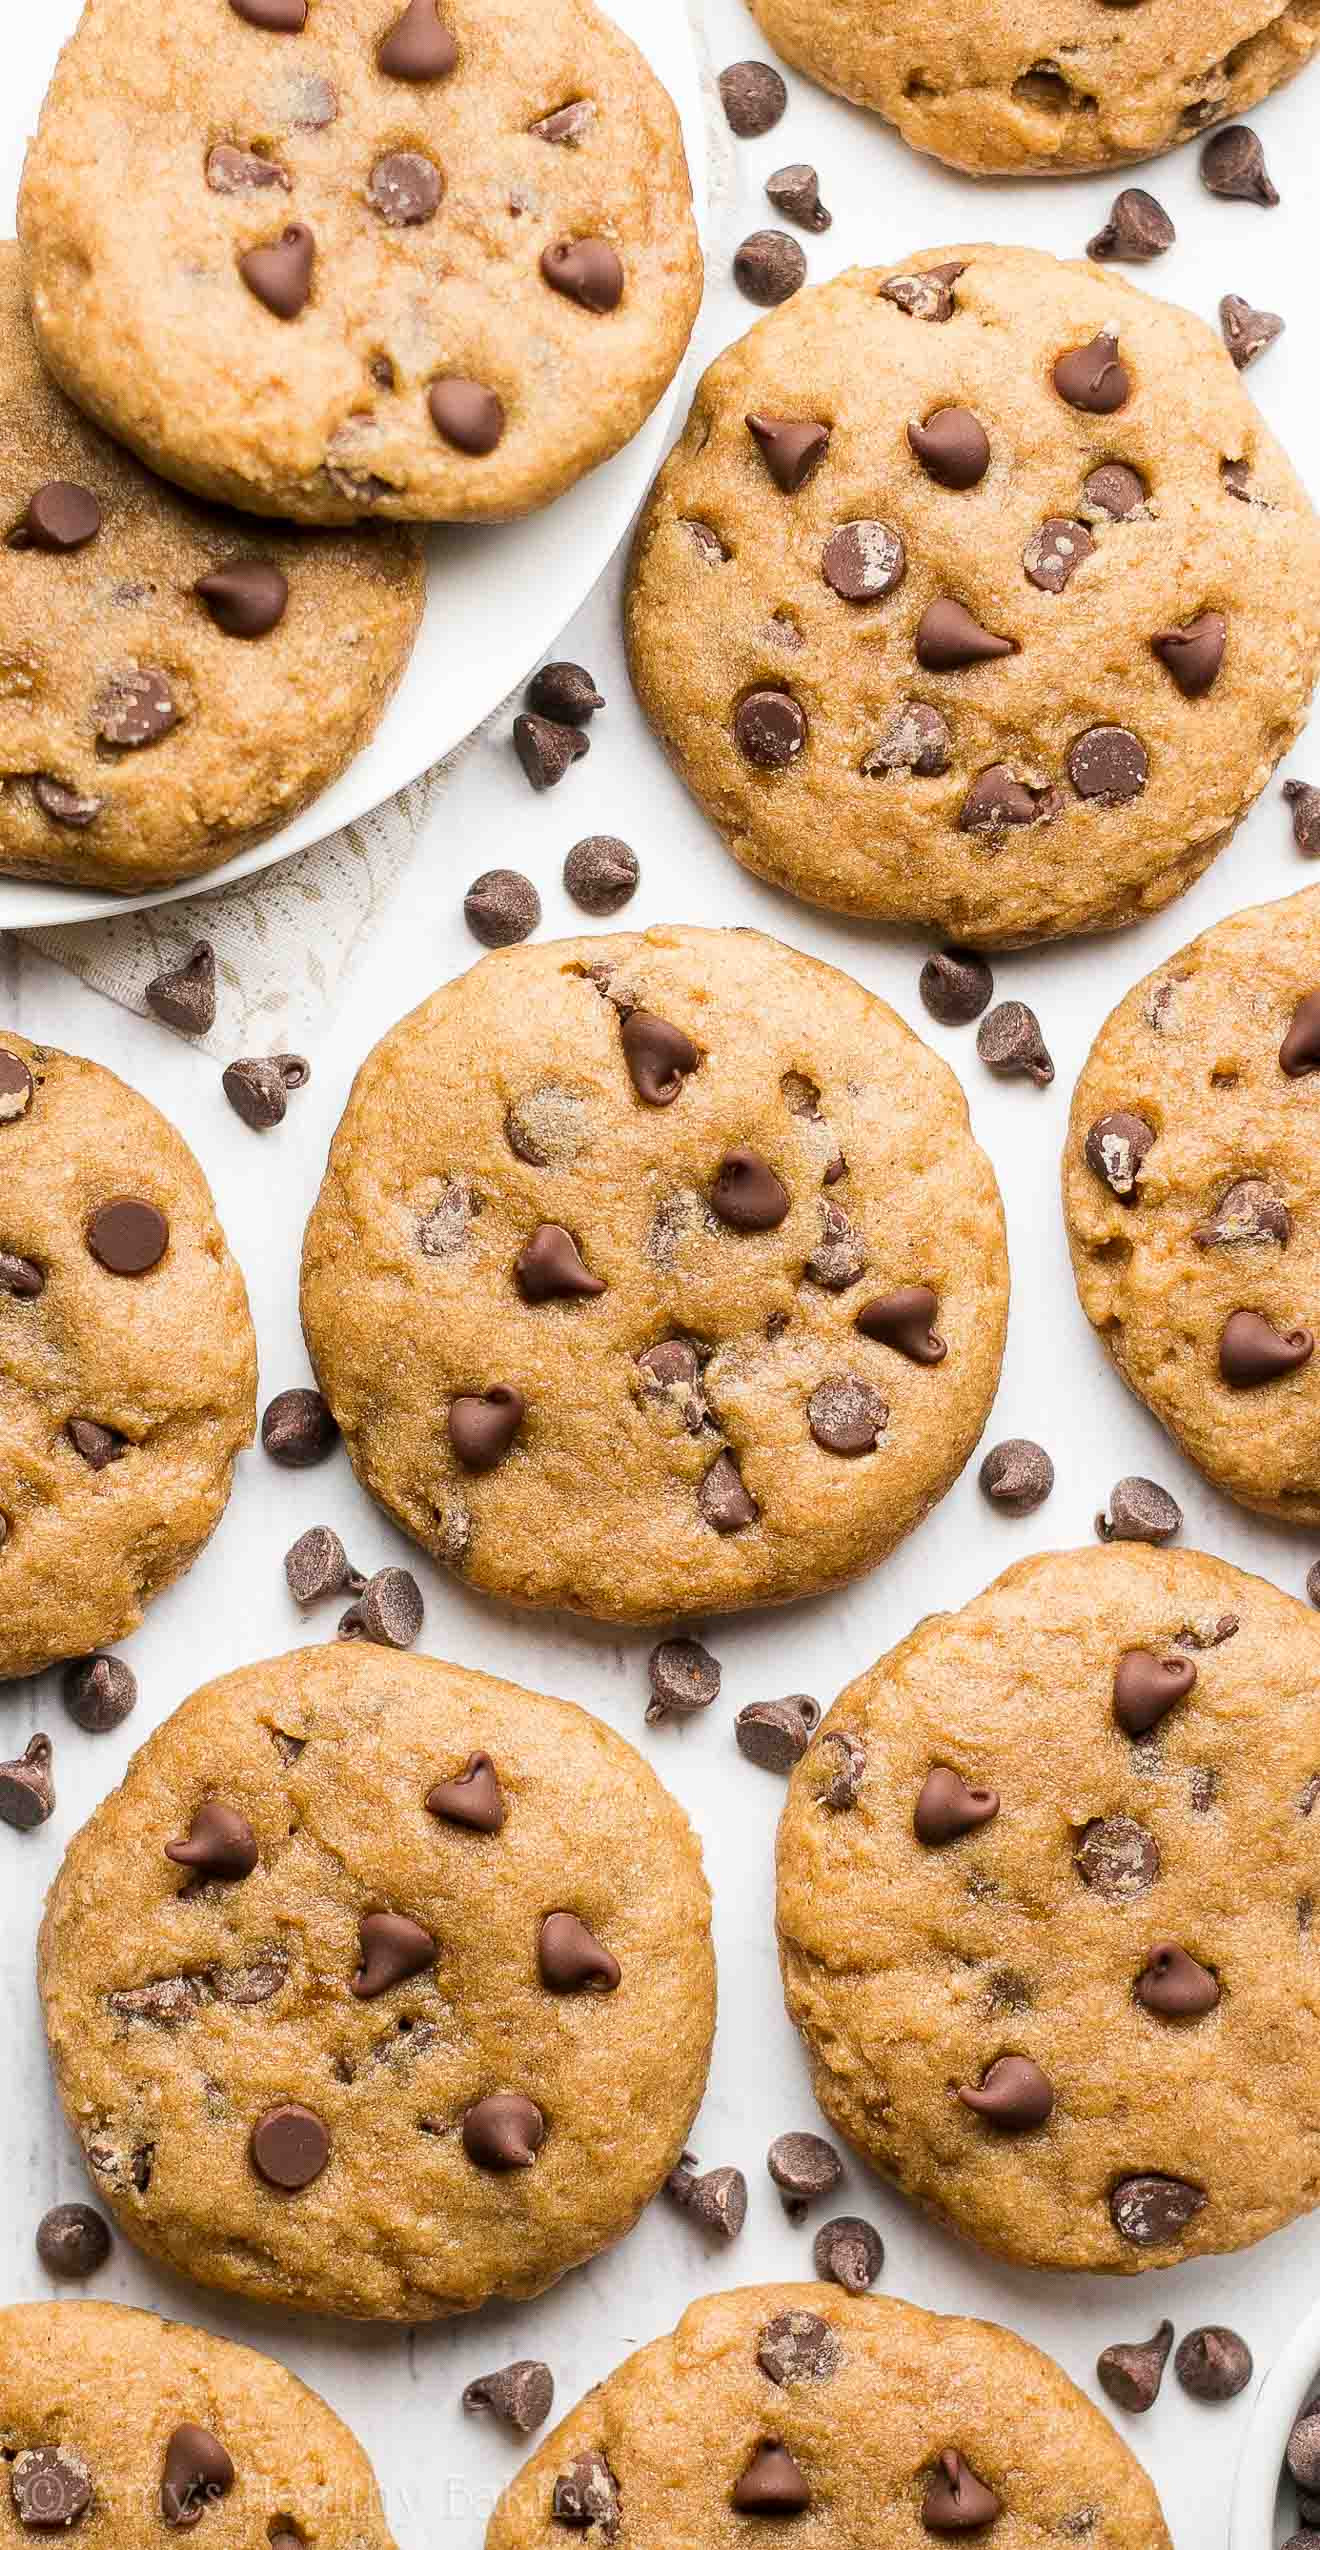 Healthy Chocolate Chip Cookies Recipe
 Healthy Banana Chocolate Chip Cookies Recipe Video